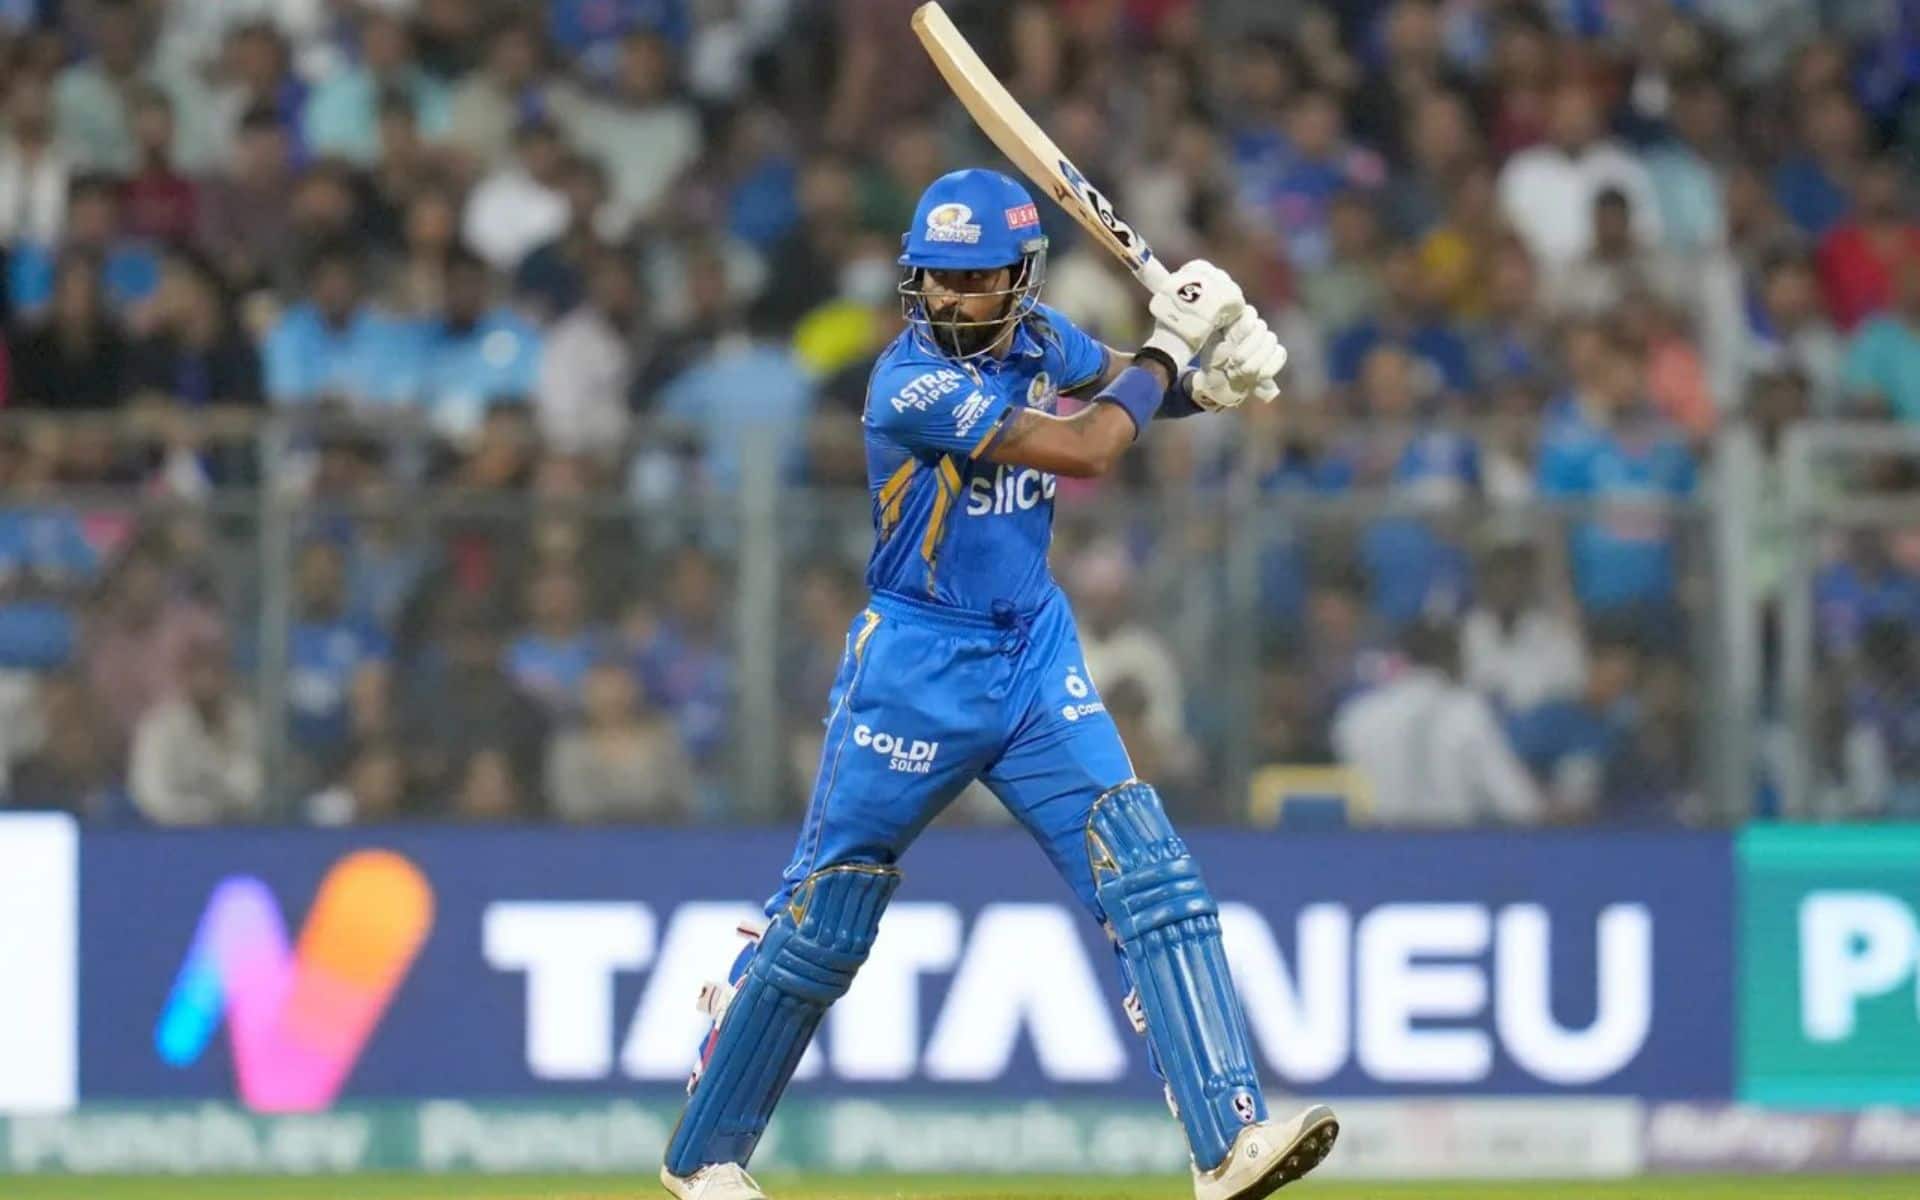 Hardik Pandya has the fourth most sixes in 20th over in the IPL (X.com)